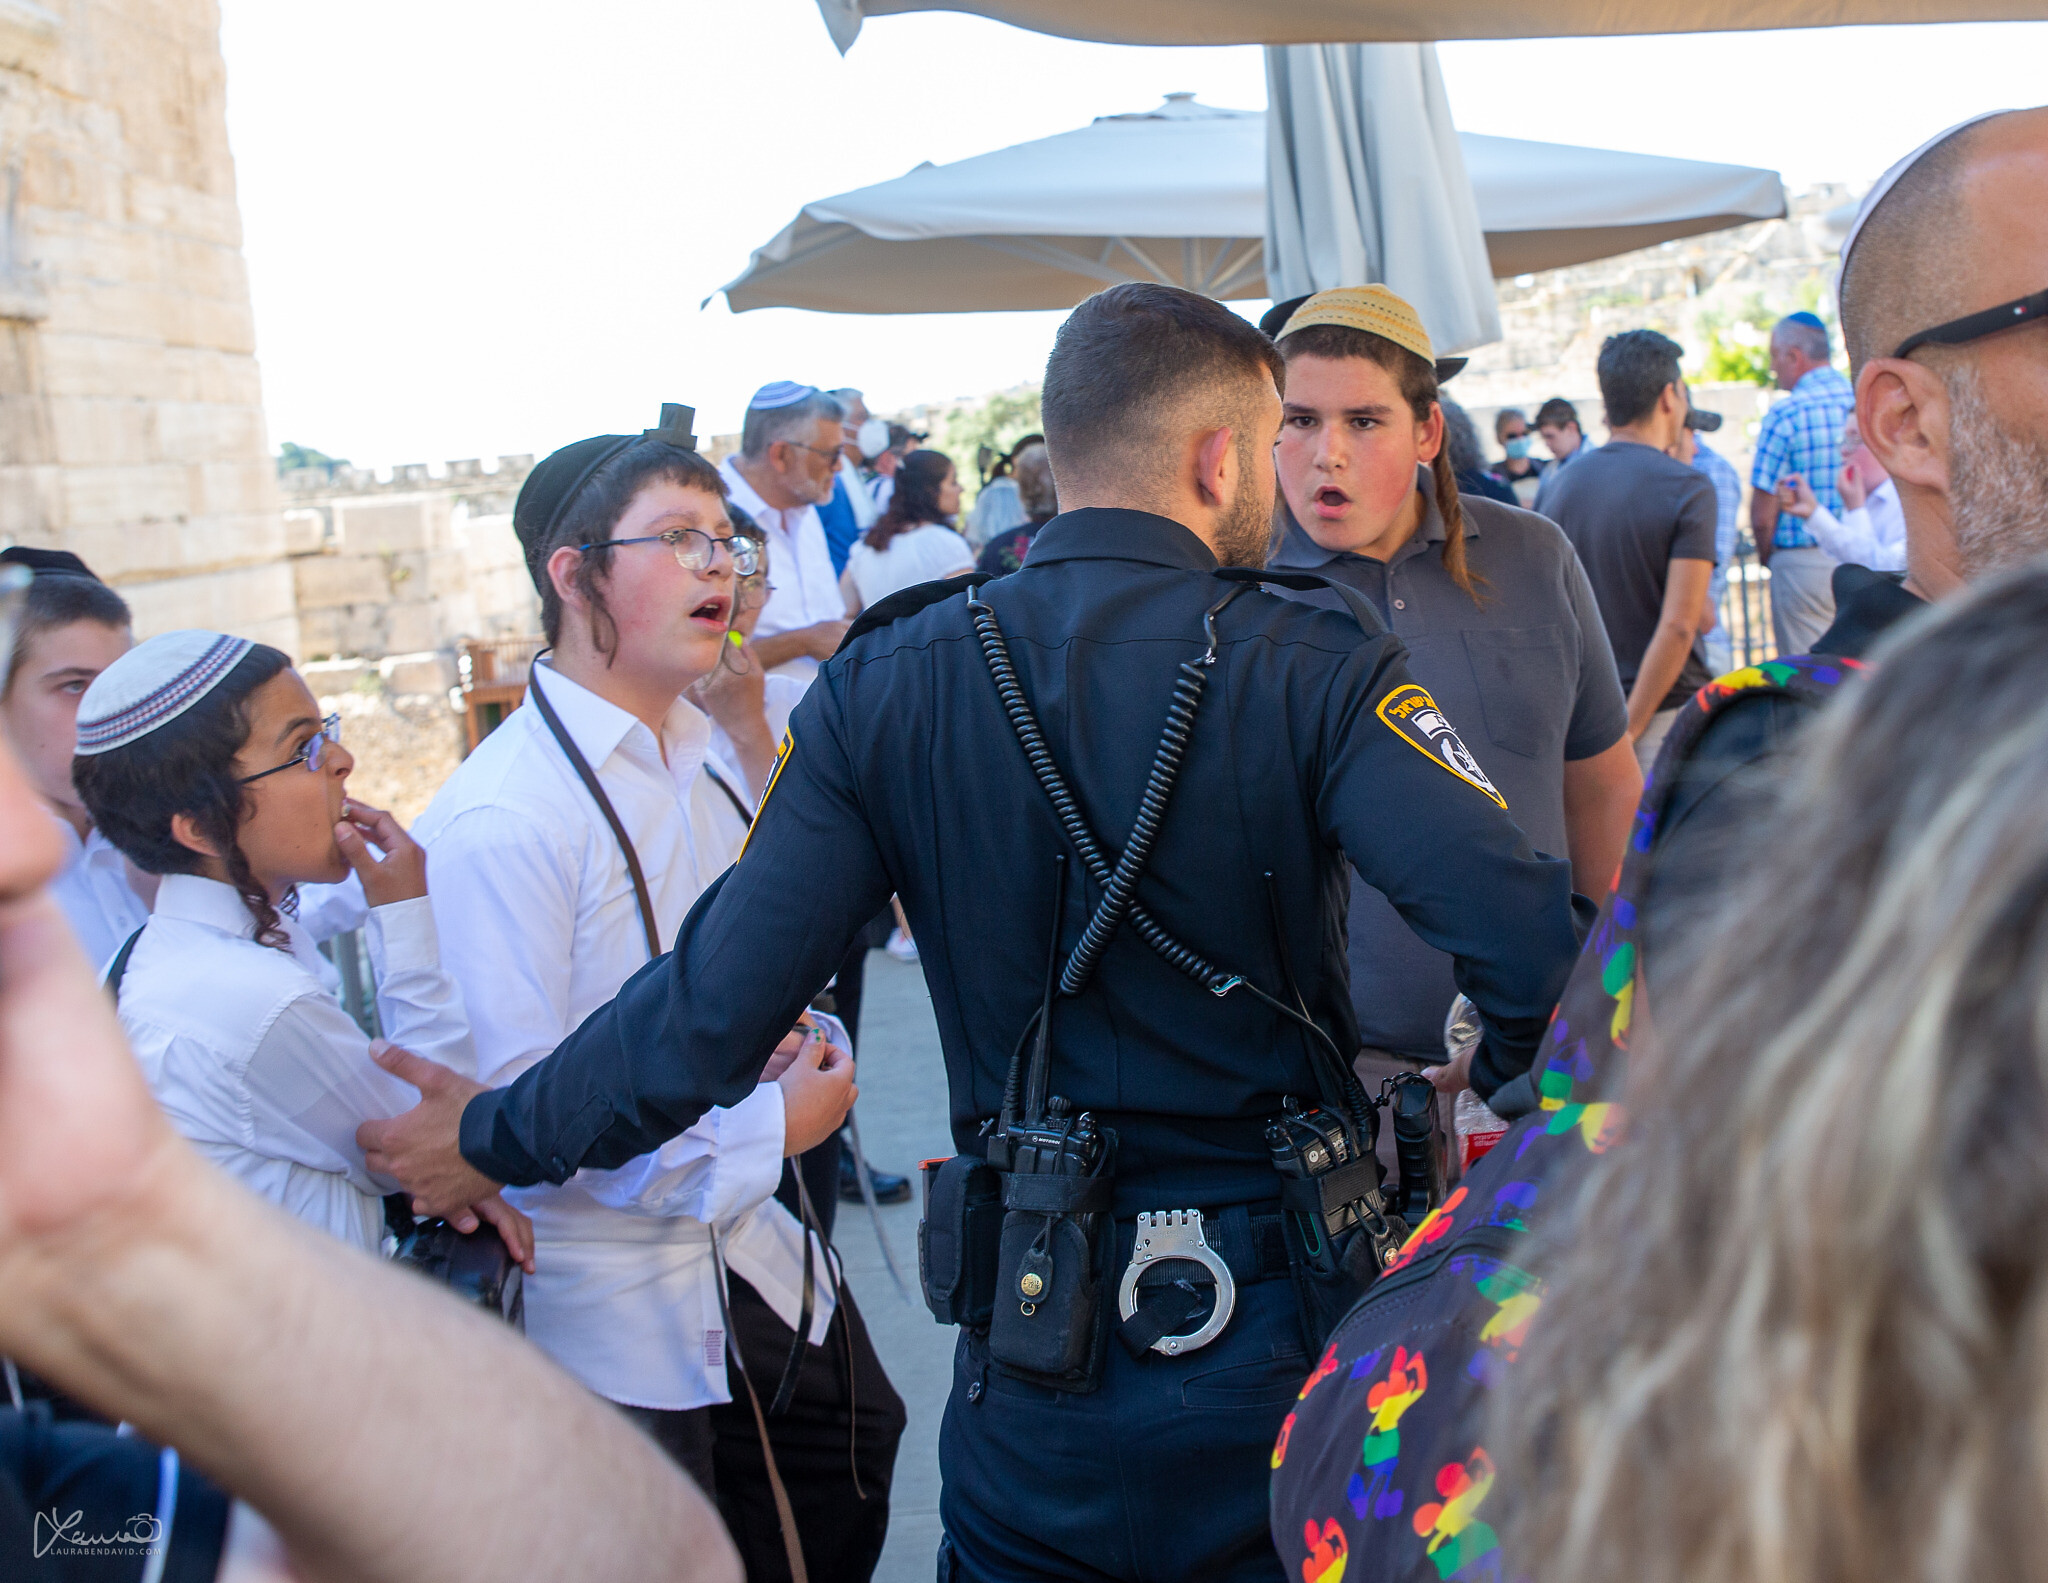 A police officer stands between a group of ultra-Orthodox youths and a bar mitzvah ceremony at the egalitarian section of the Western Wall on June 30, 2022. (Laura Ben-David)